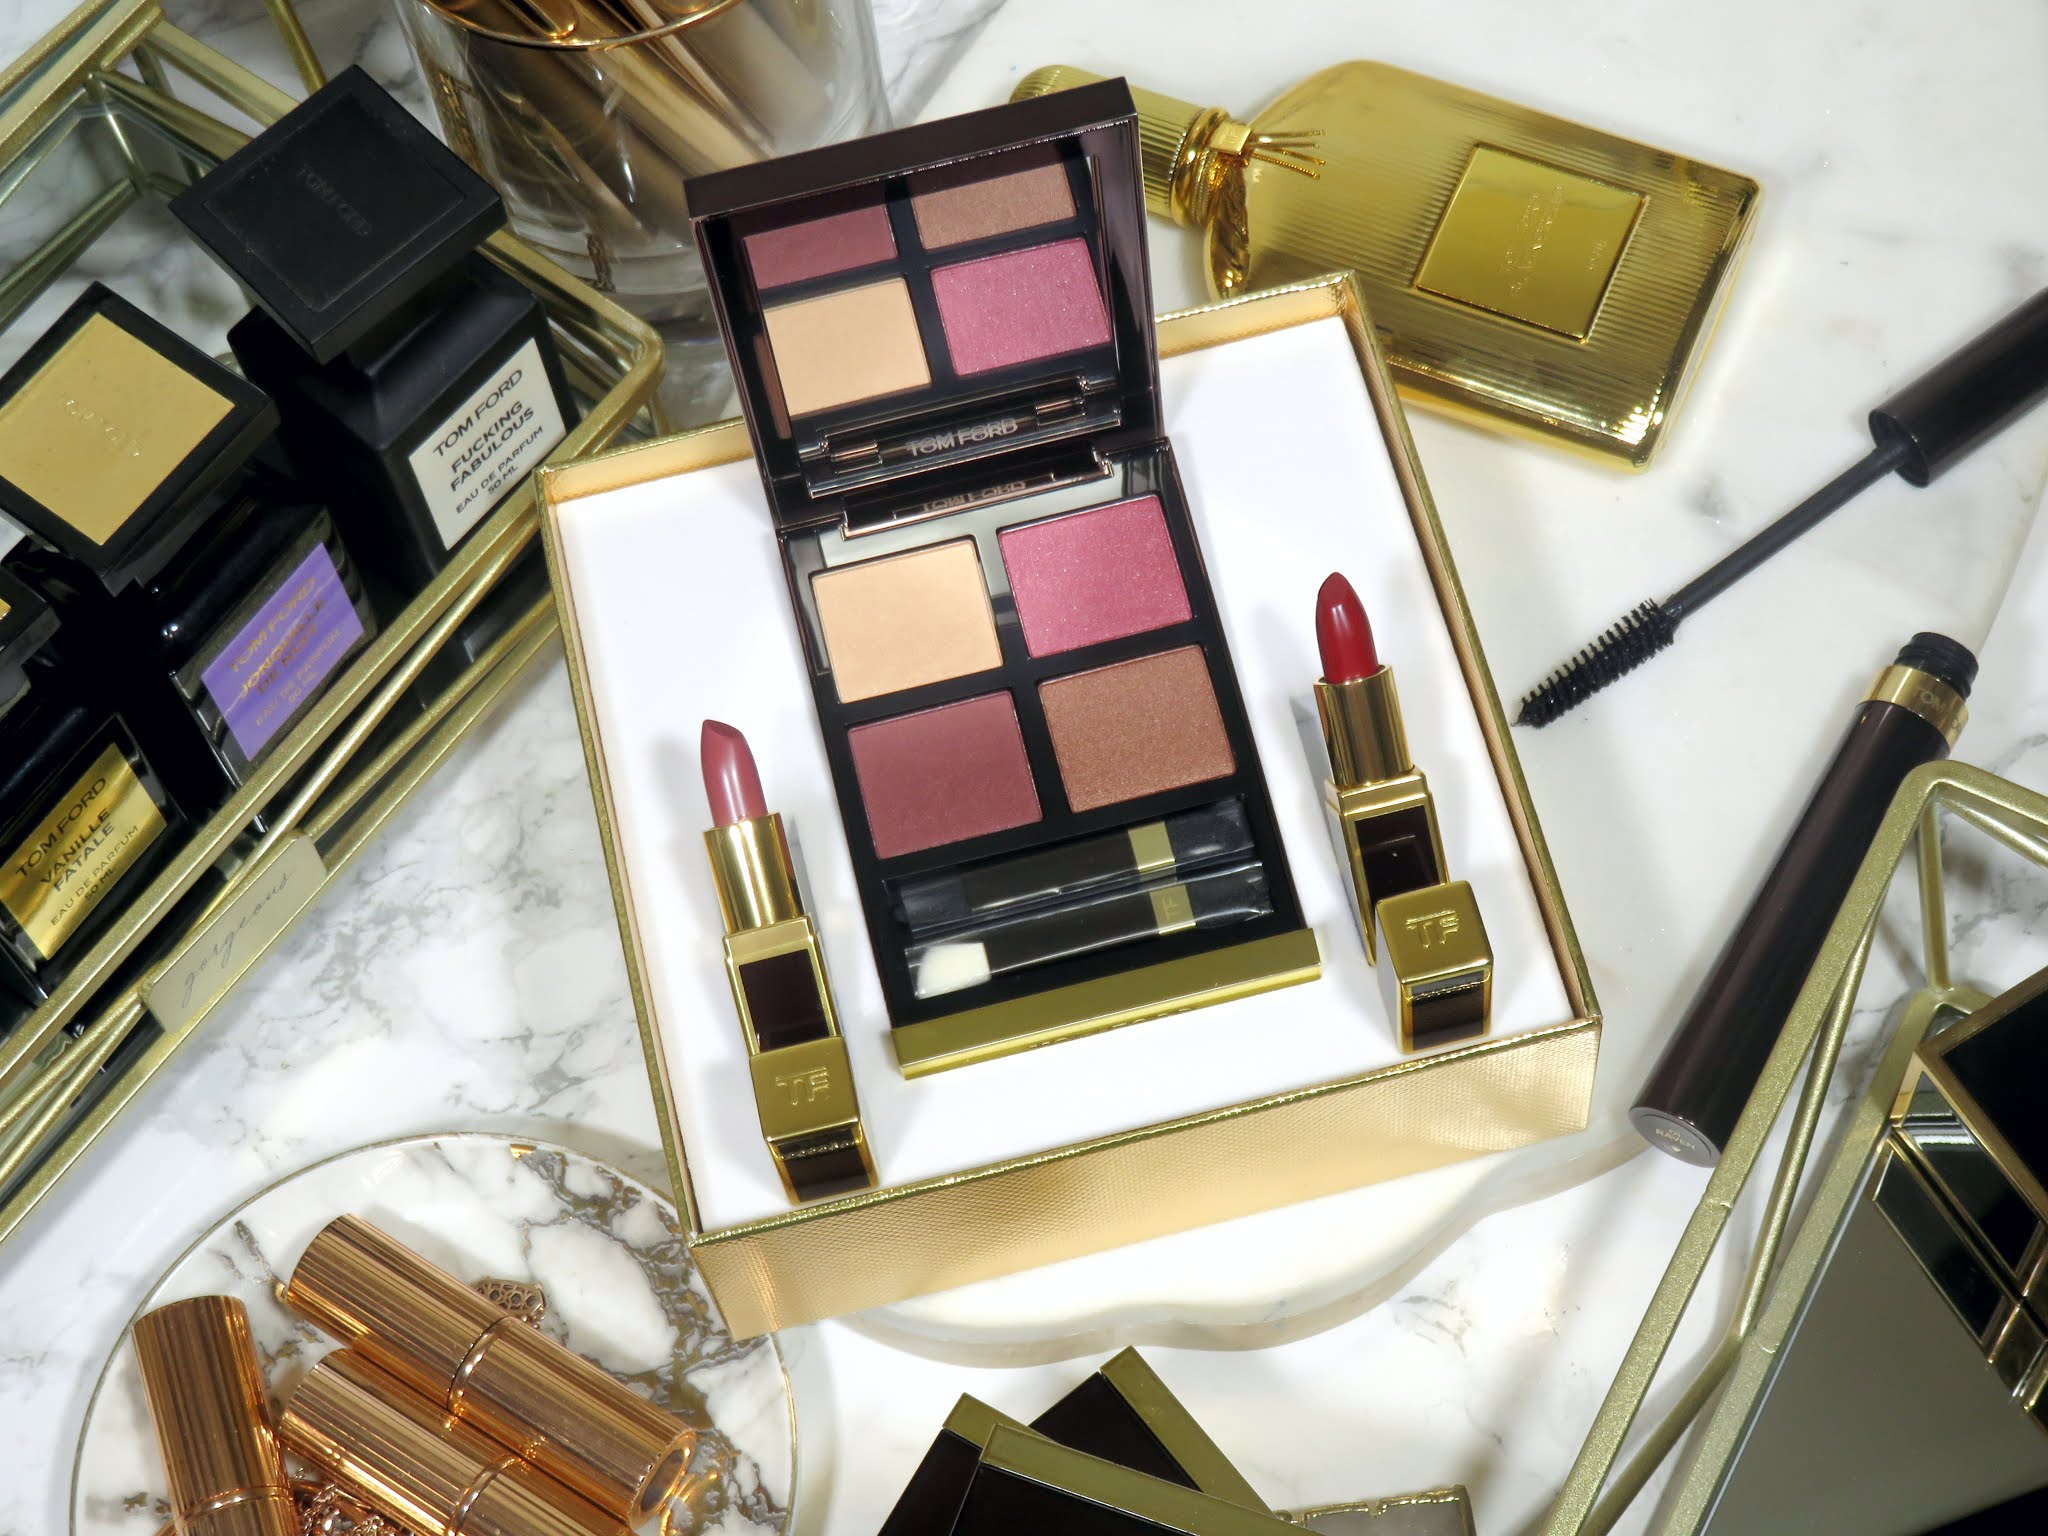 Tom Ford Burnished Amber Eye Color Quad Review and Swatches